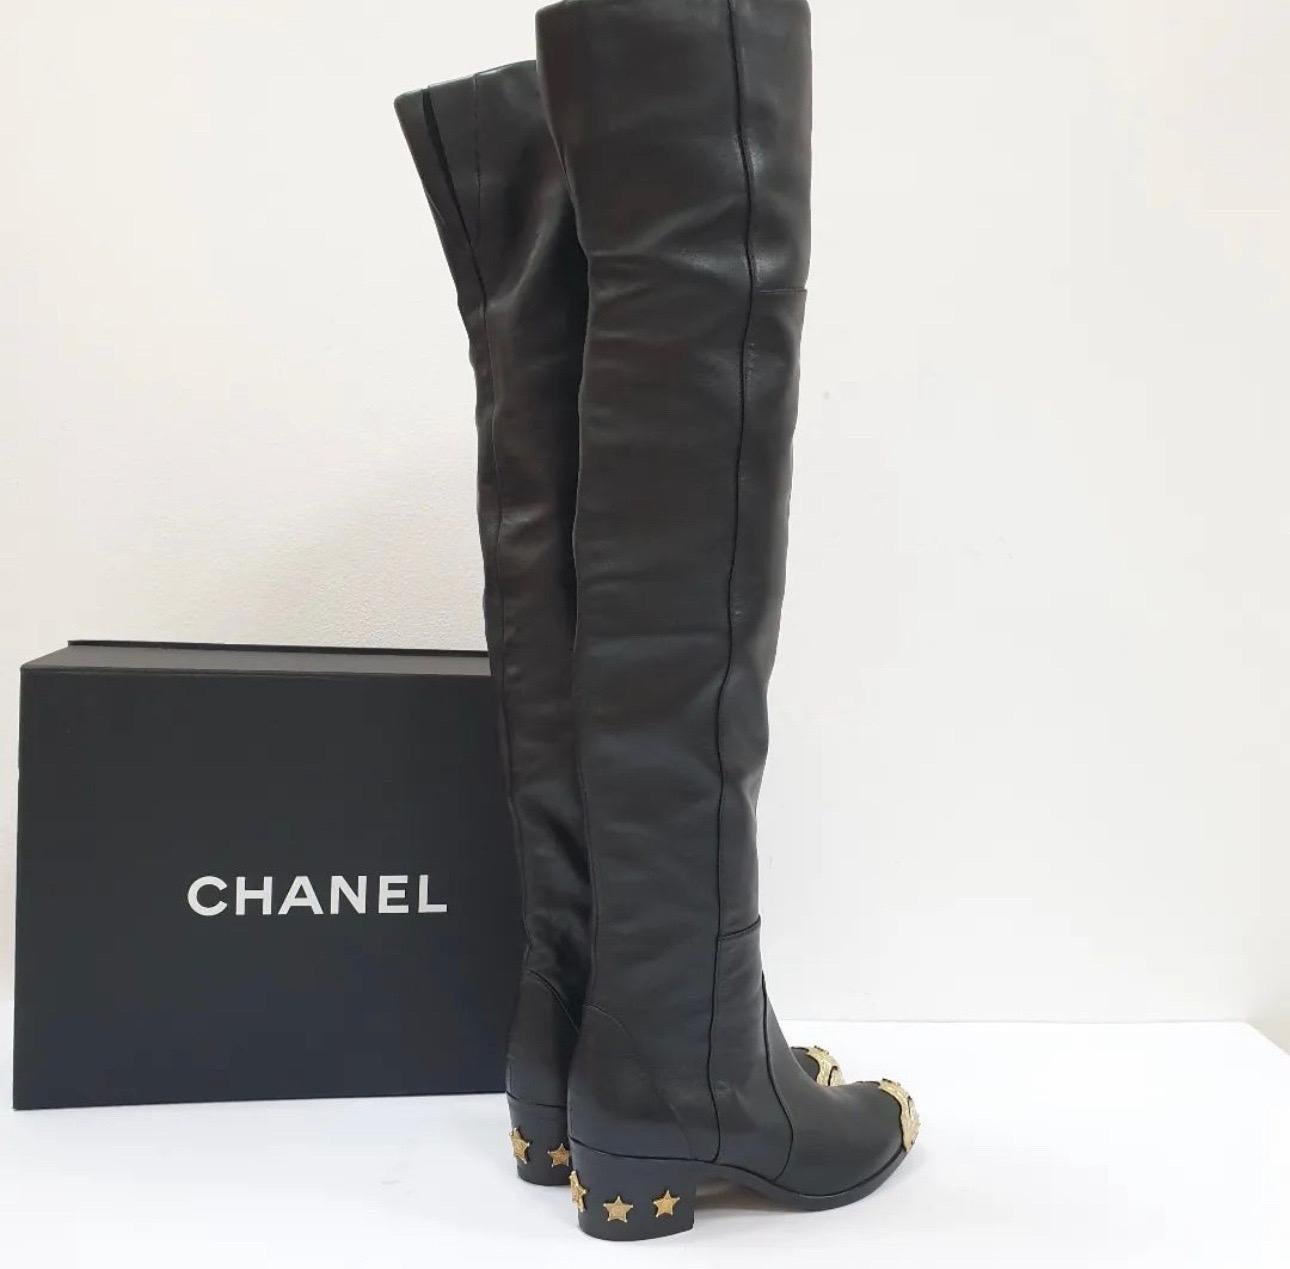 Chanel Black Leather Paris Dallas Metal Cap Toe Thigh High Boots/Booties In Excellent Condition For Sale In Krakow, PL